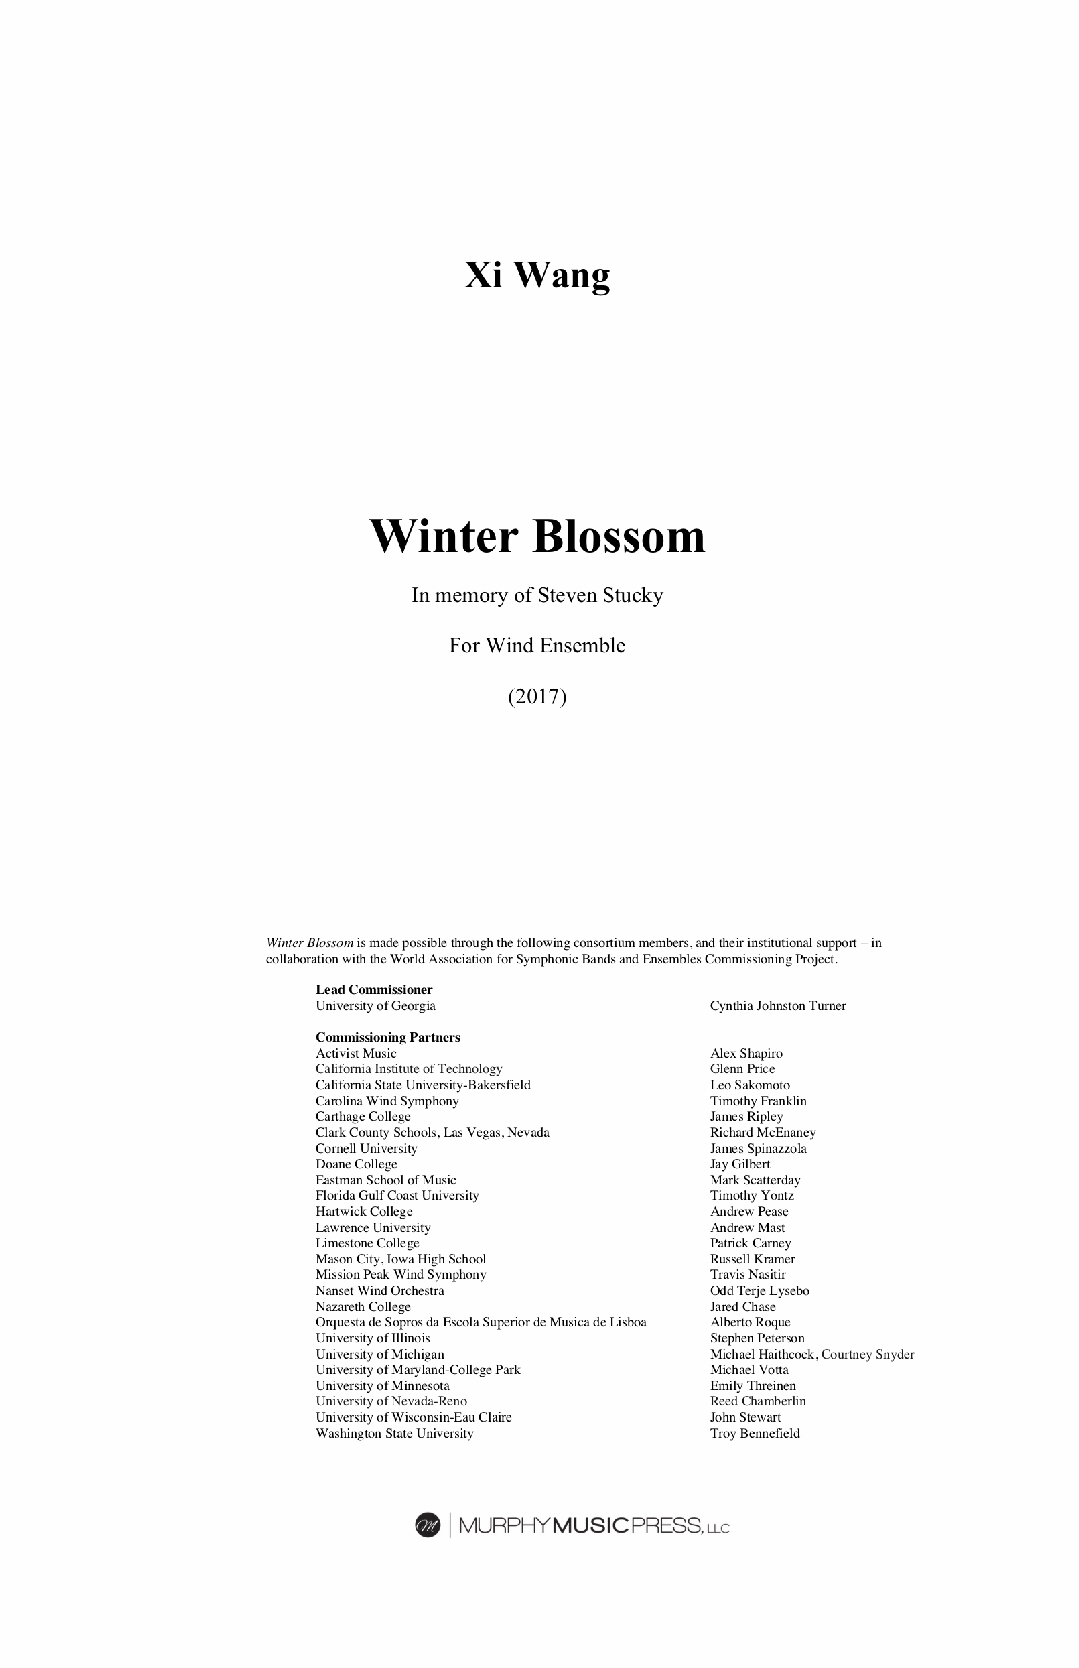 Winter Blossom (Score Only) by Xi Wang